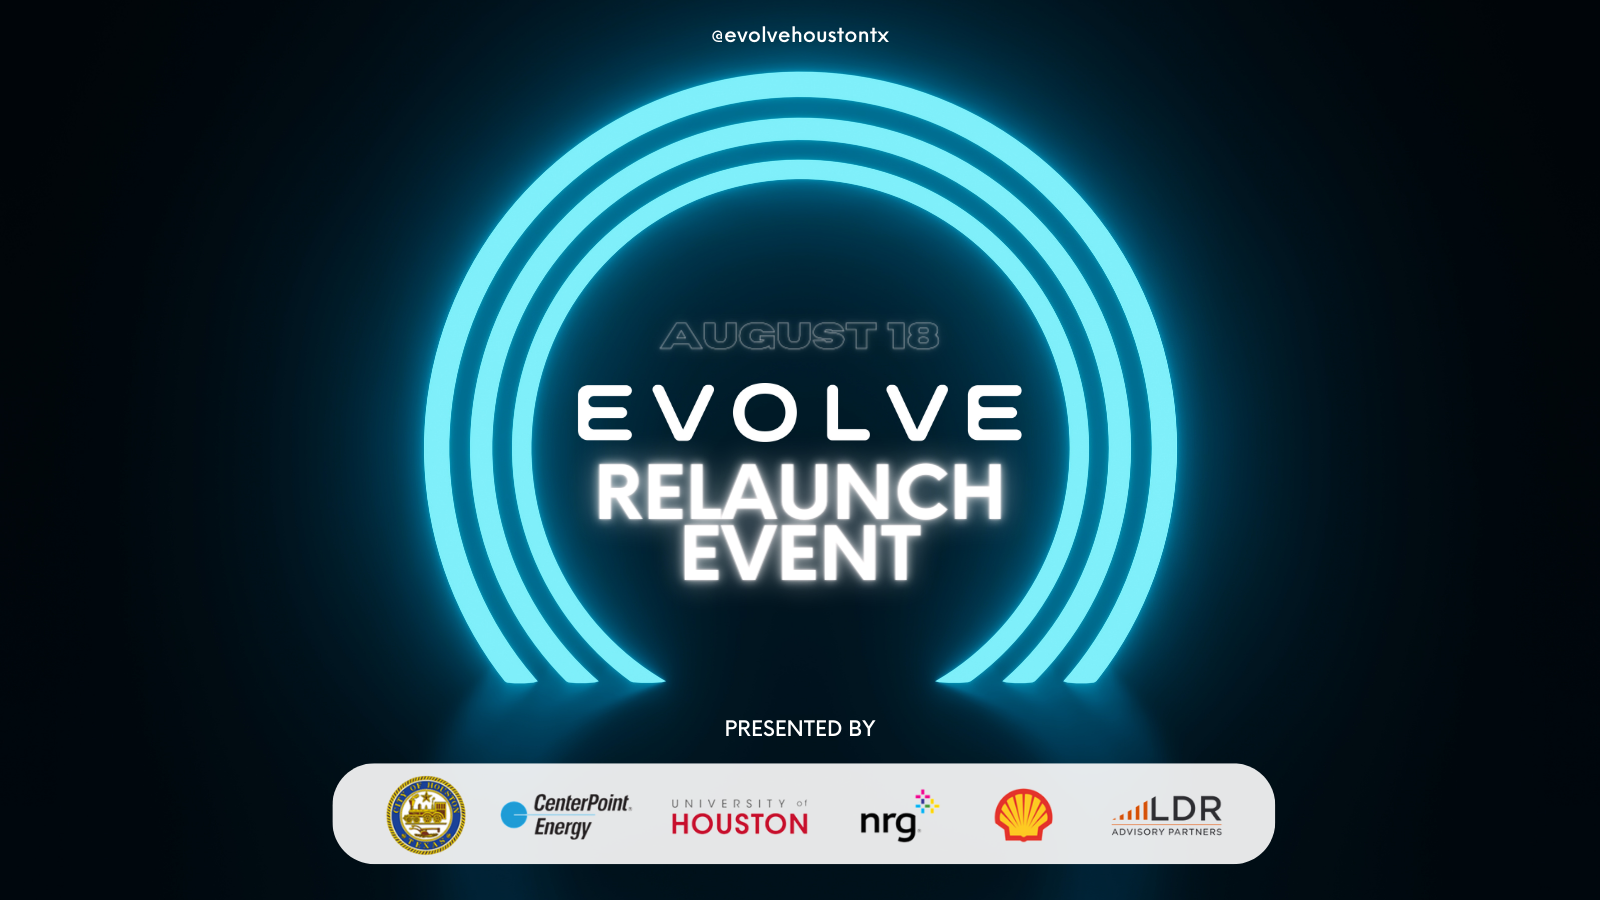 Evolve Houston Launch event logo with sponors